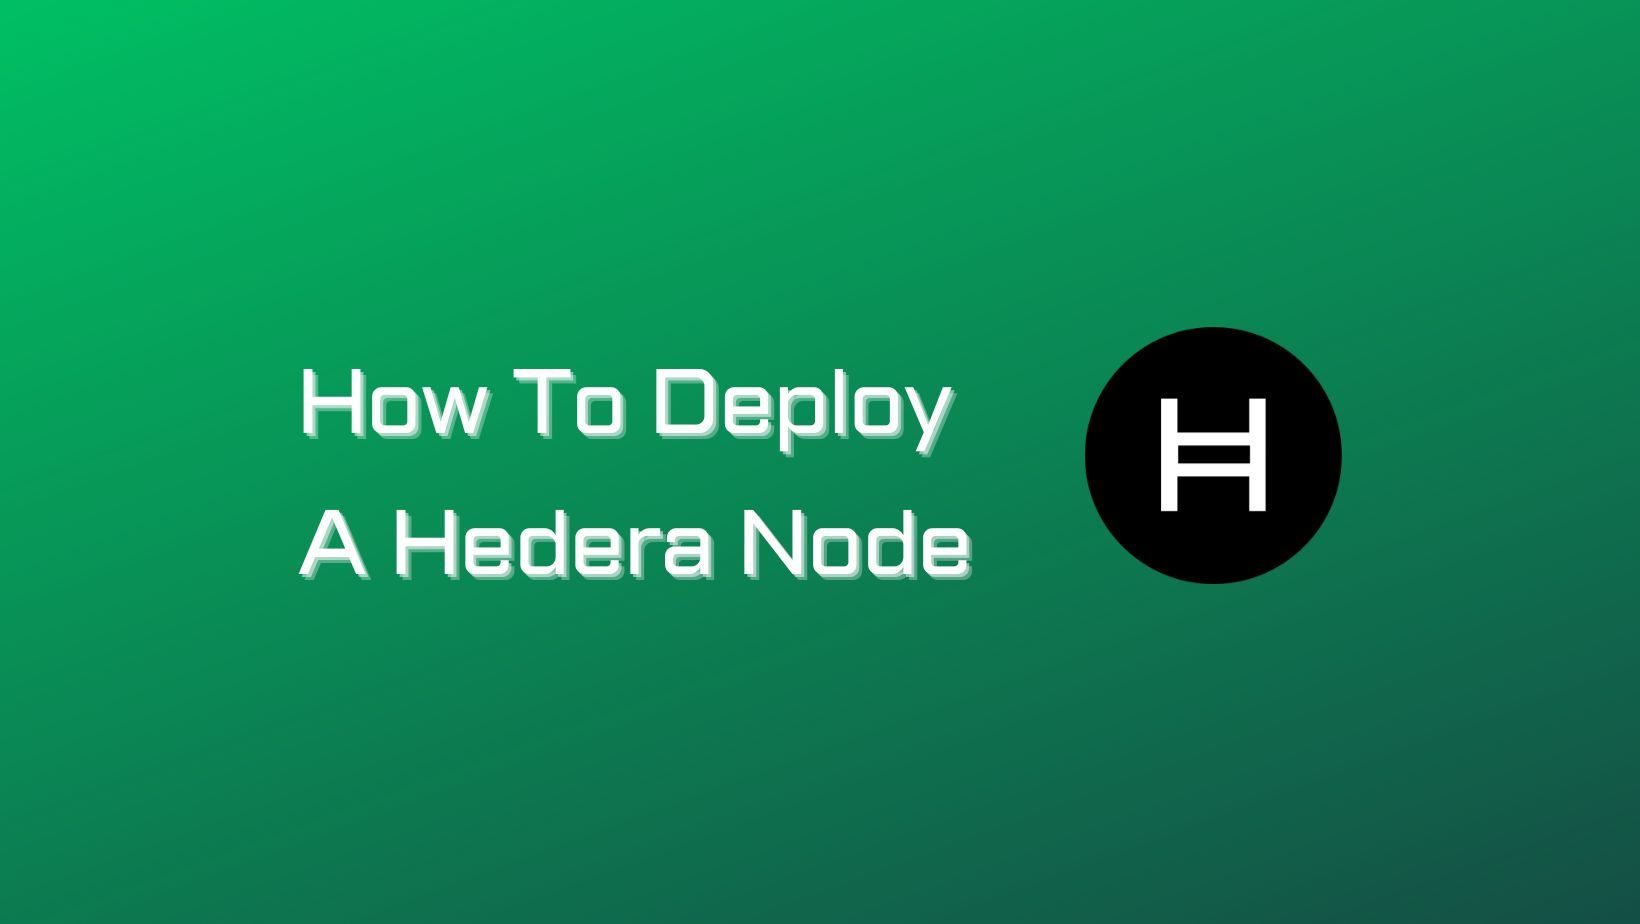 How To Deploy A Hedera Consensus Node on Mainnet